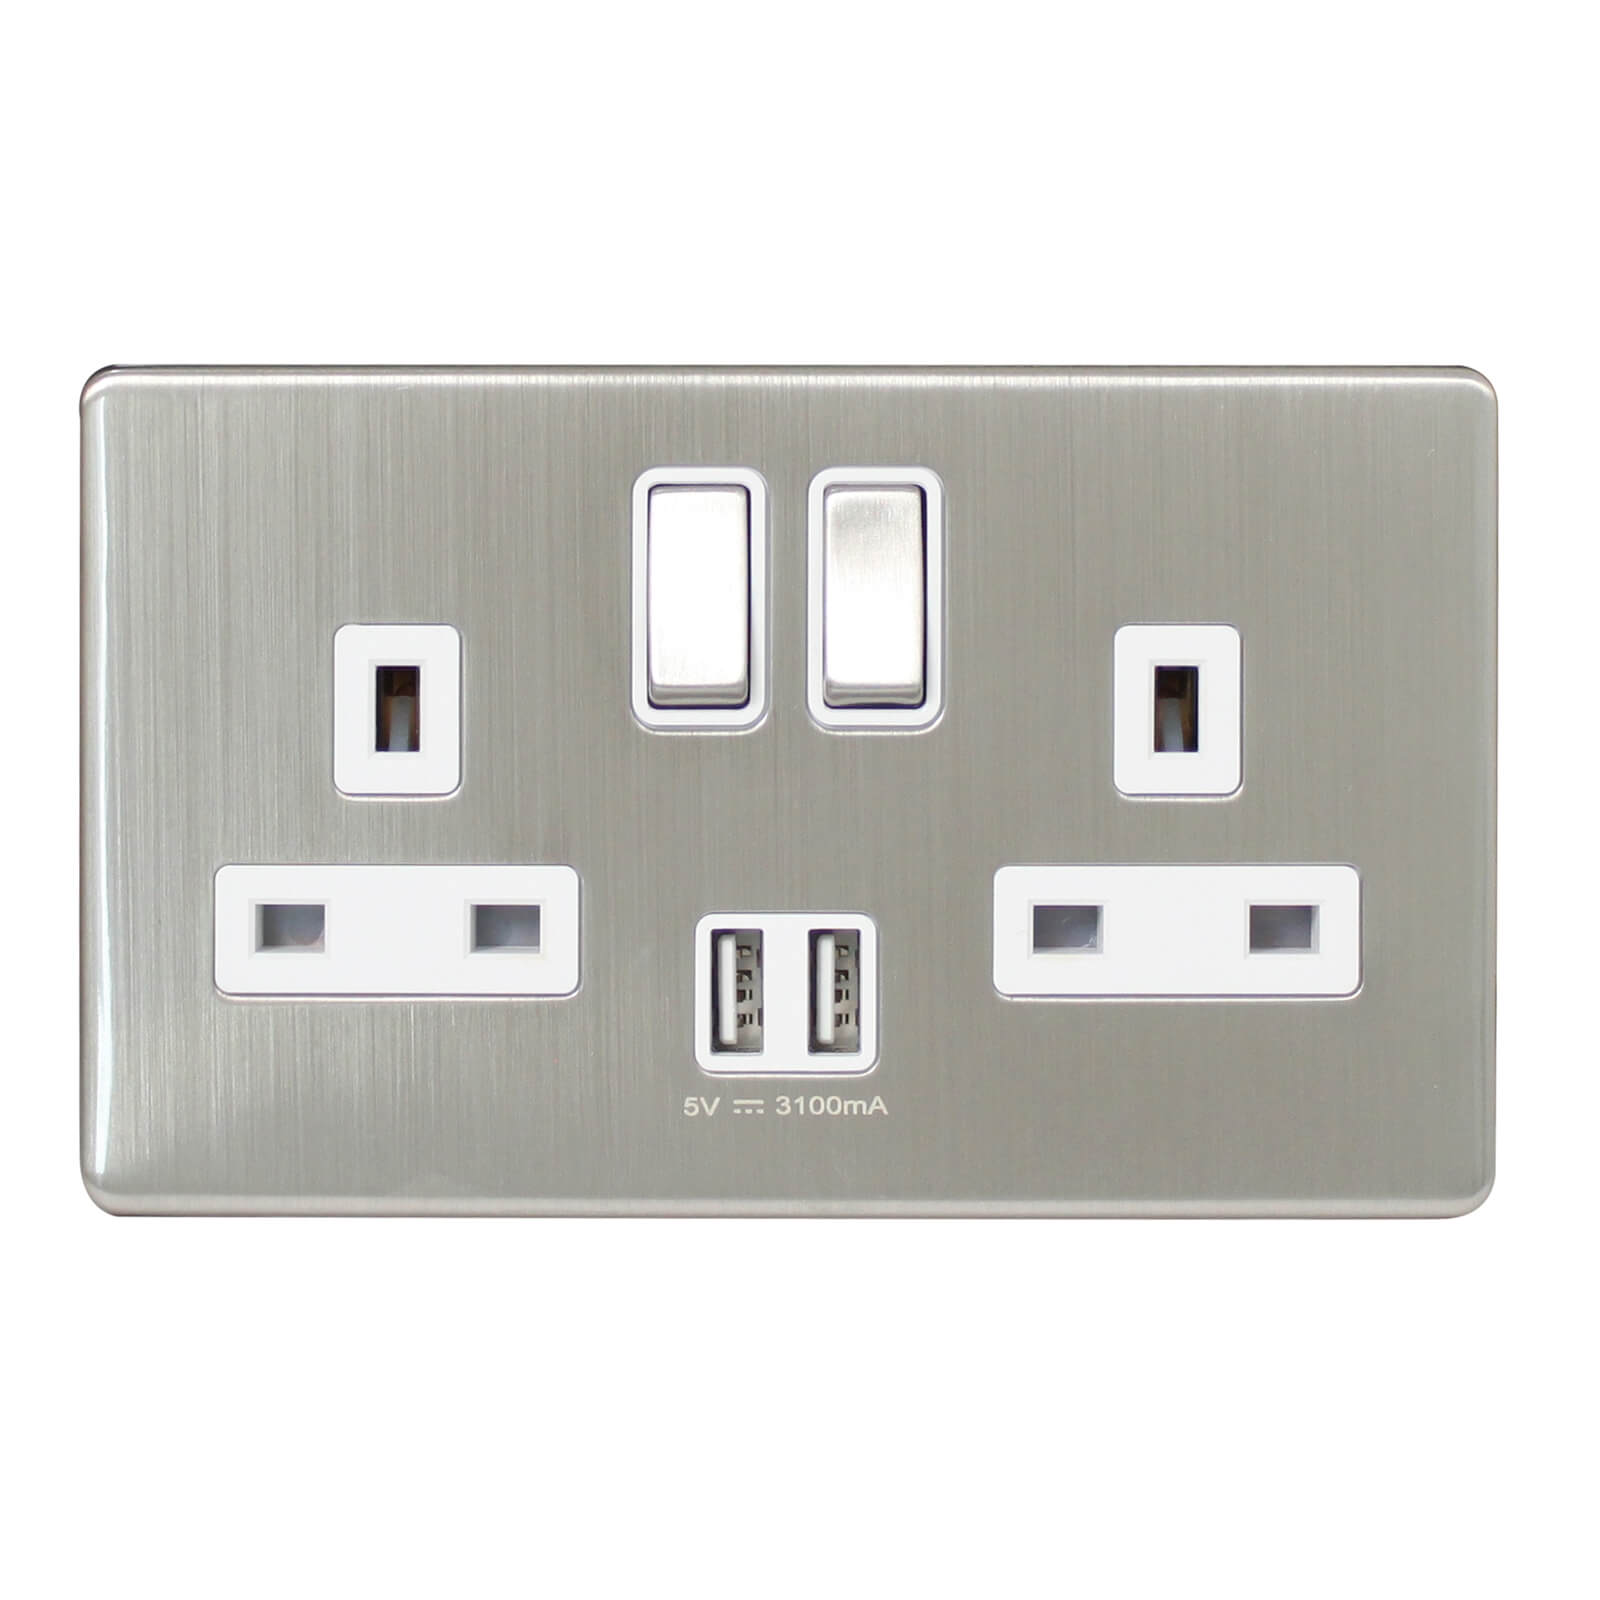 Arlec Metal Screwless 13 Amp 2 Gang Switched Socket with 2 x 3.A USB Stainless Steel